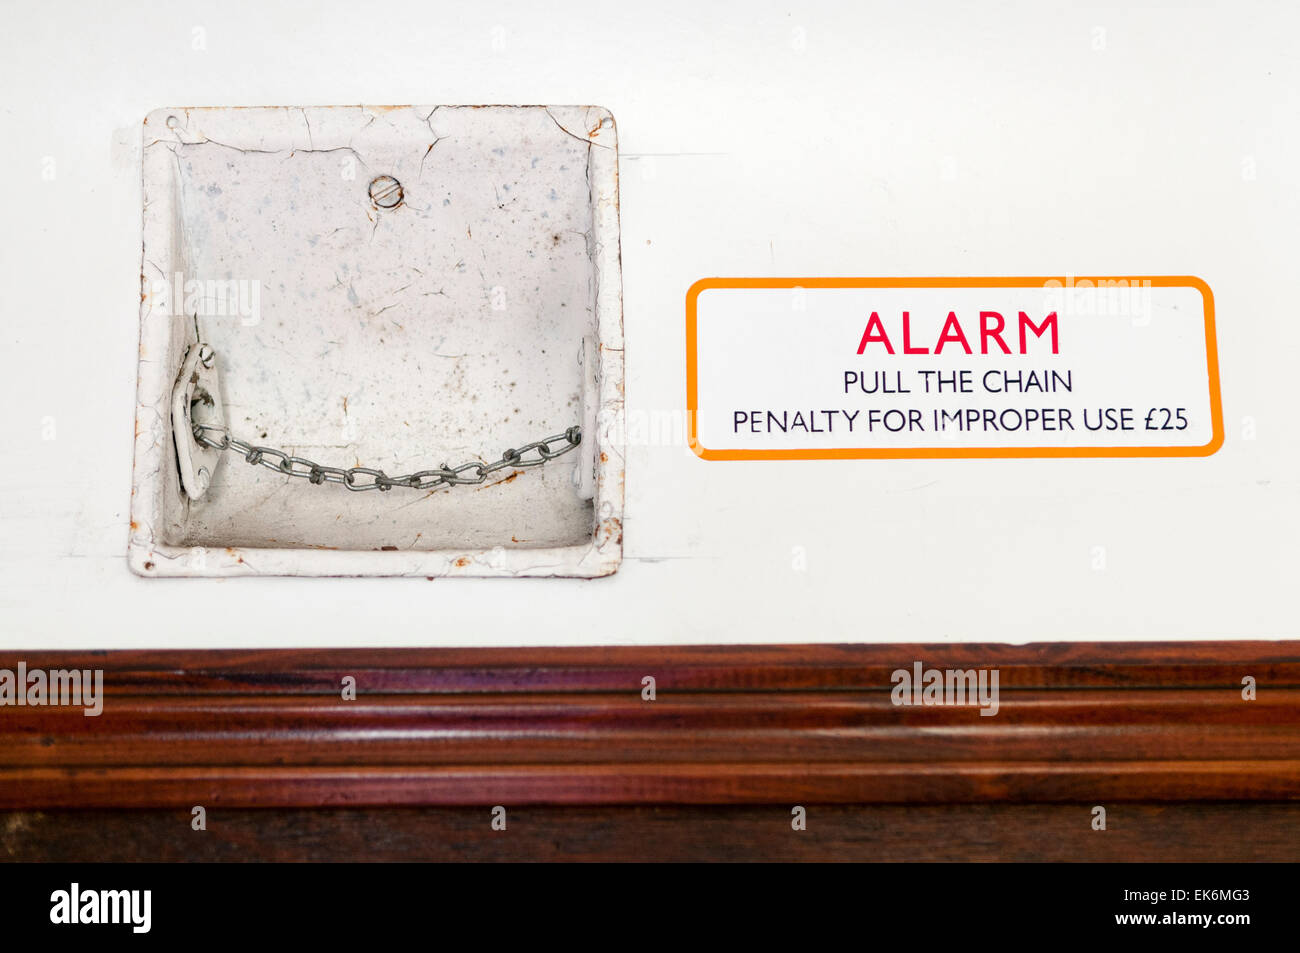 Passenger alarm chain inside an old fashioned railway carriage, and sign warning about improper use Stock Photo